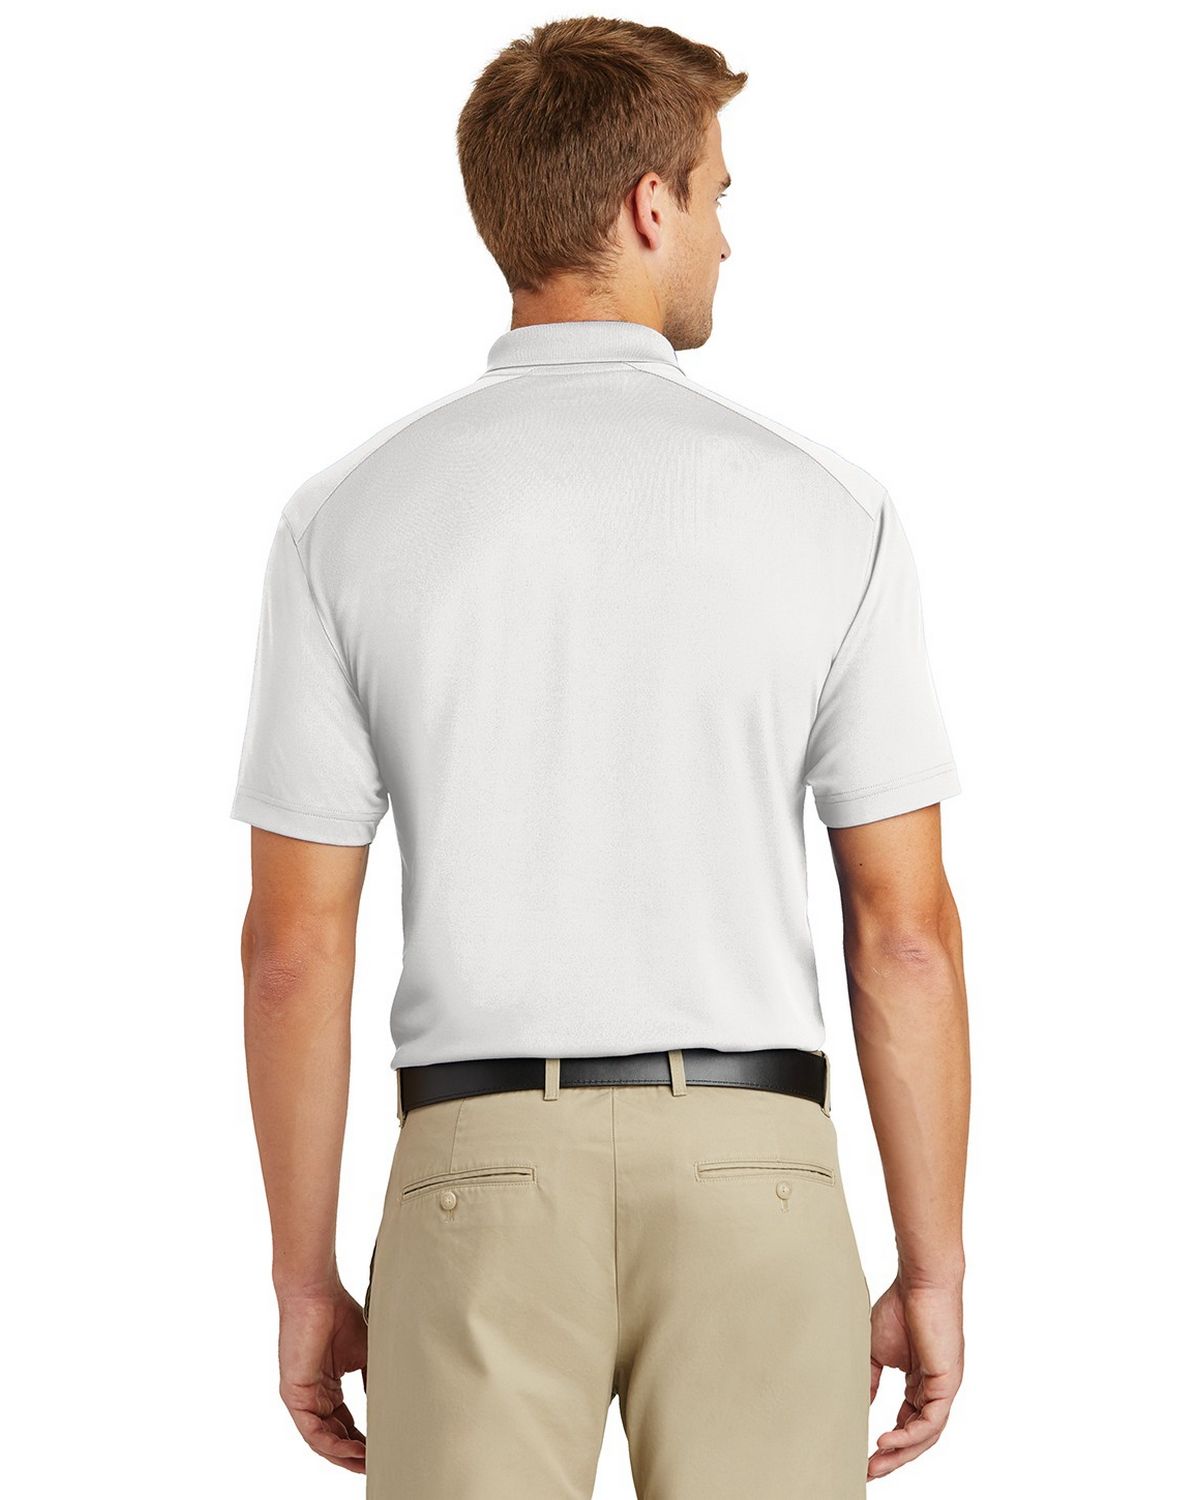 Size Chart for Cornerstone CS418 Select Lightweight Snag-Proof Polo